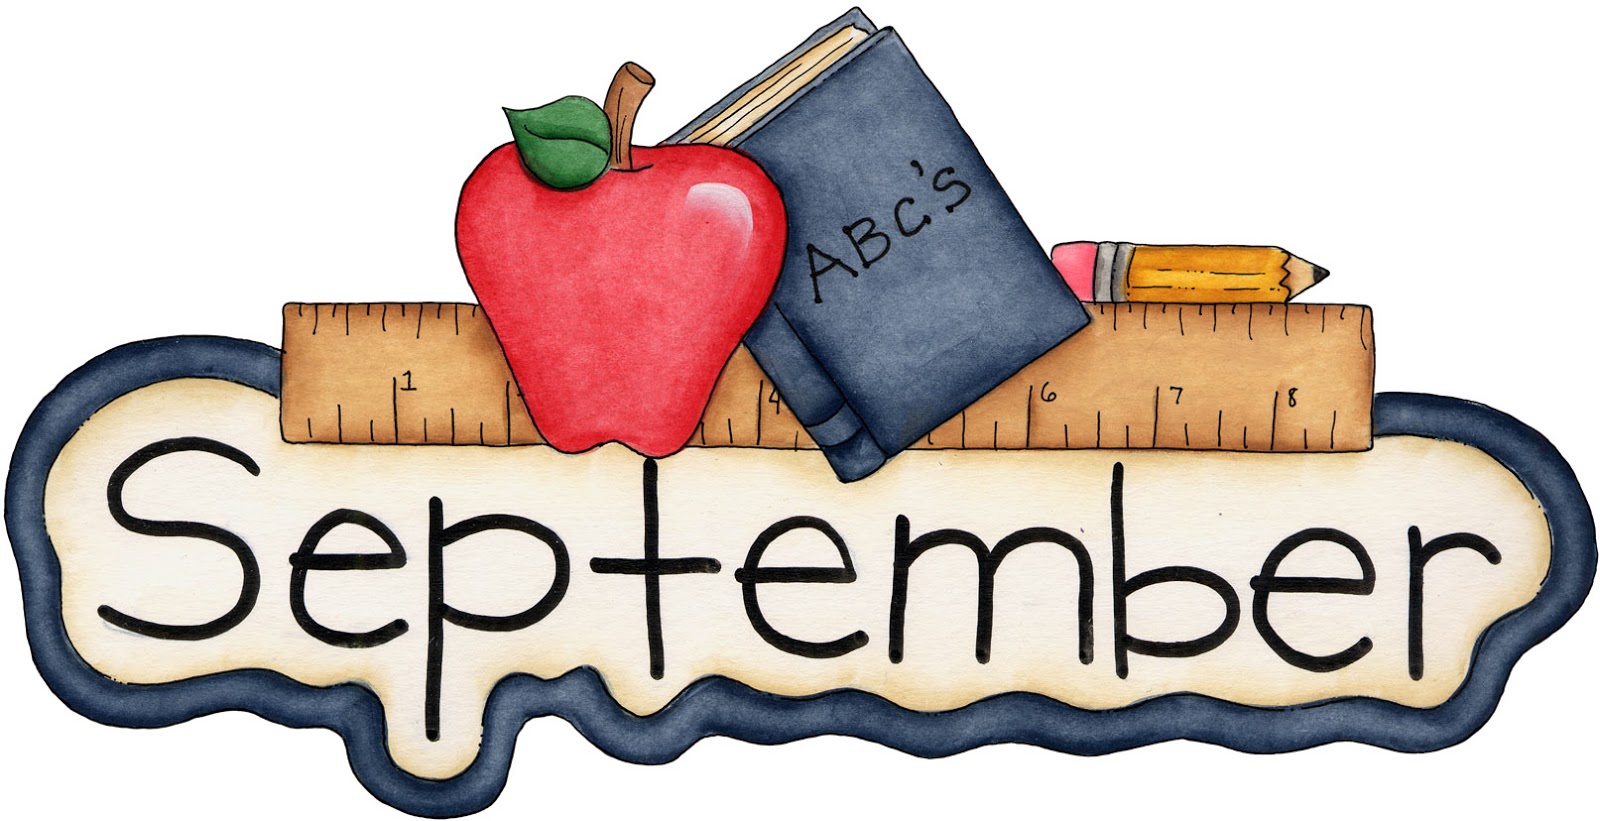 The best free September clipart images. Download from 96.